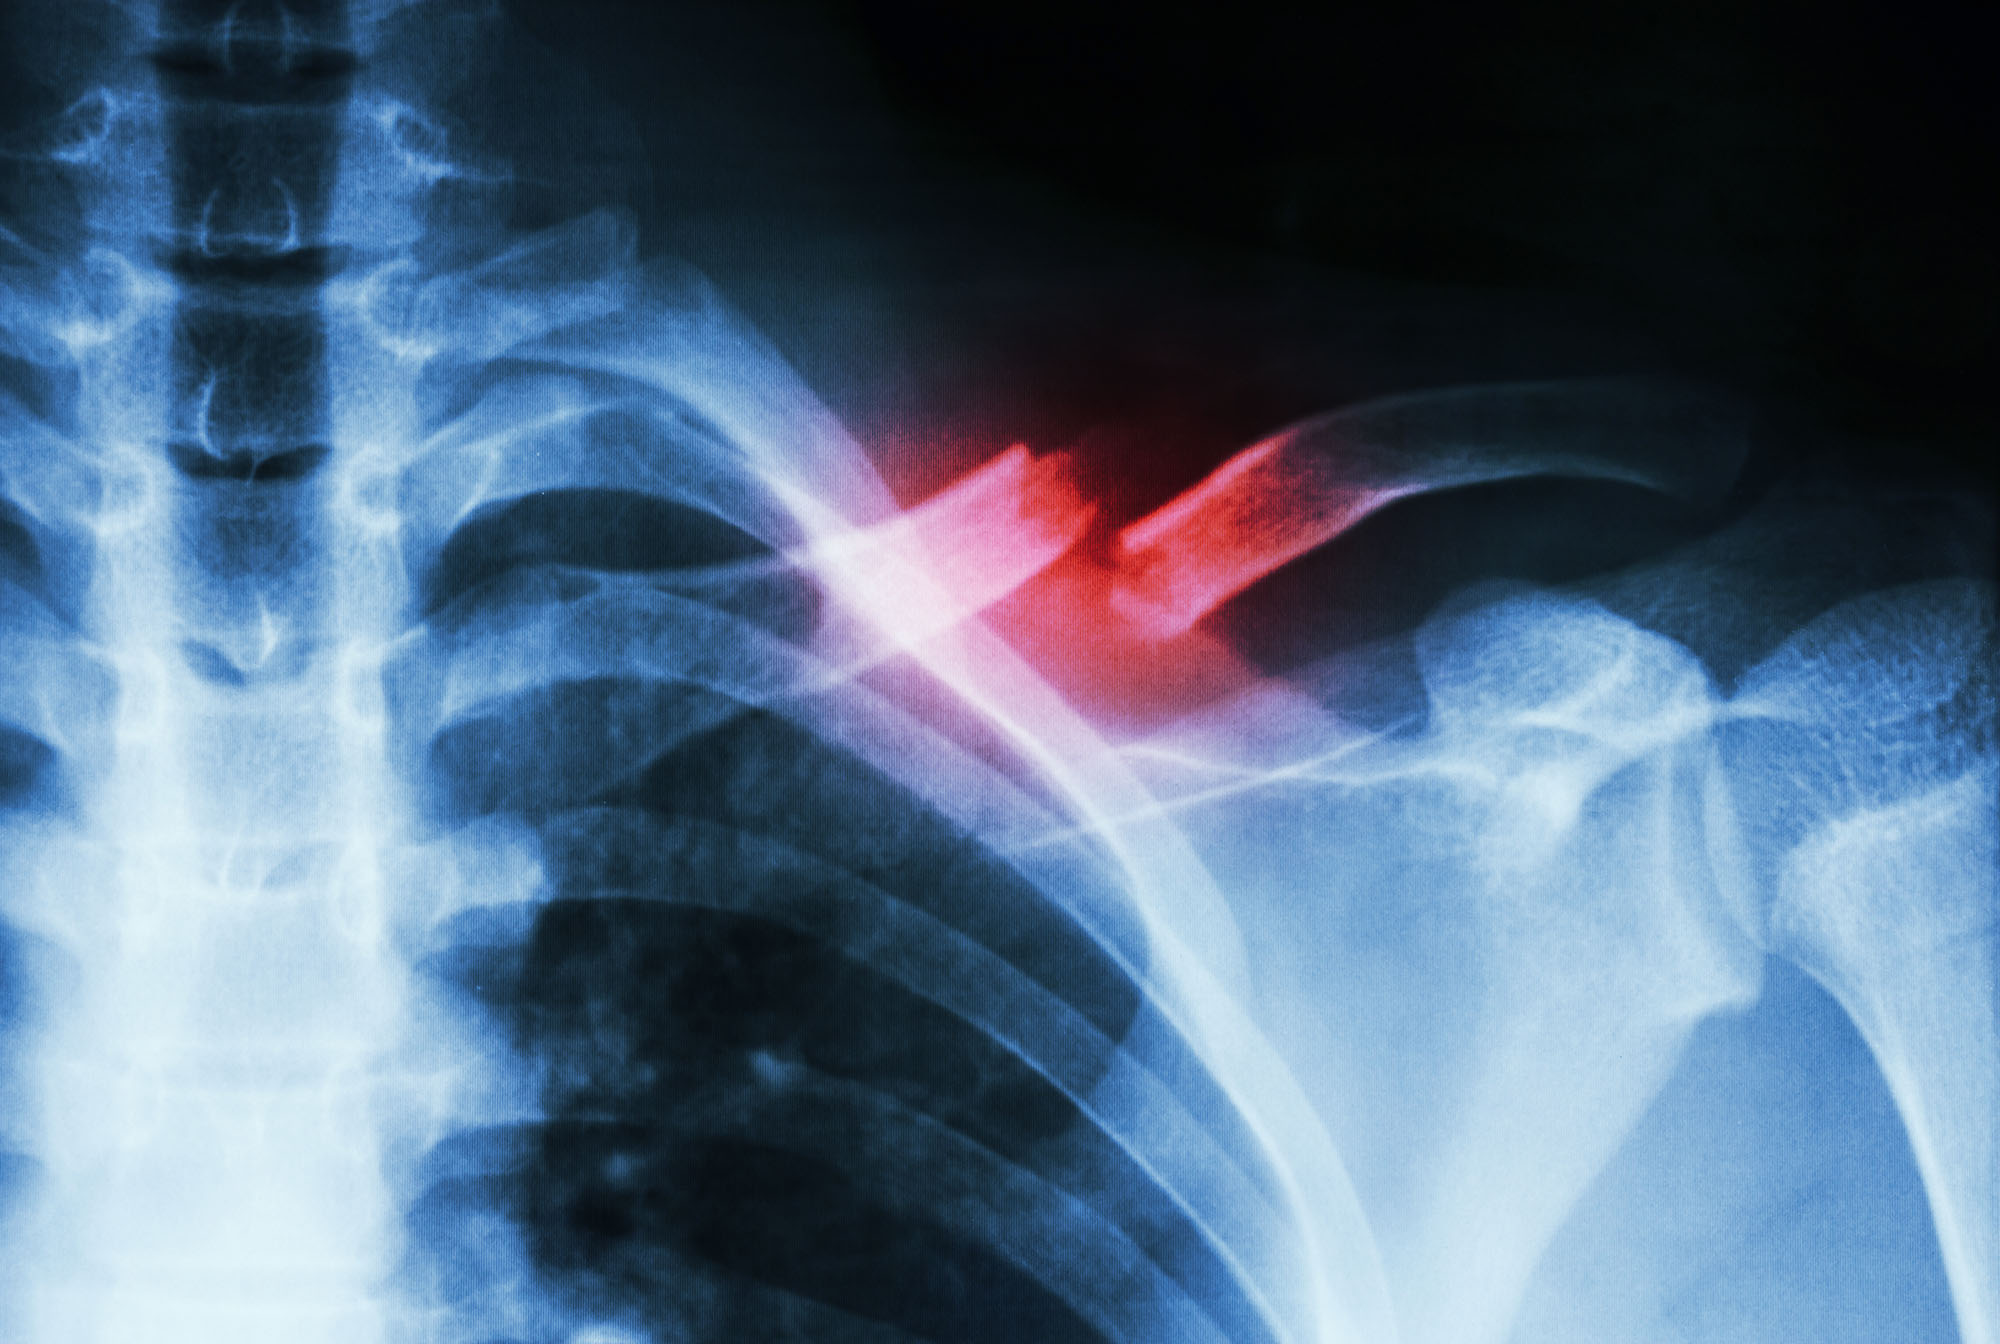 The red highlighted area shows a break that occurred when the patient tried to break their fall with their arm, a common reflex.